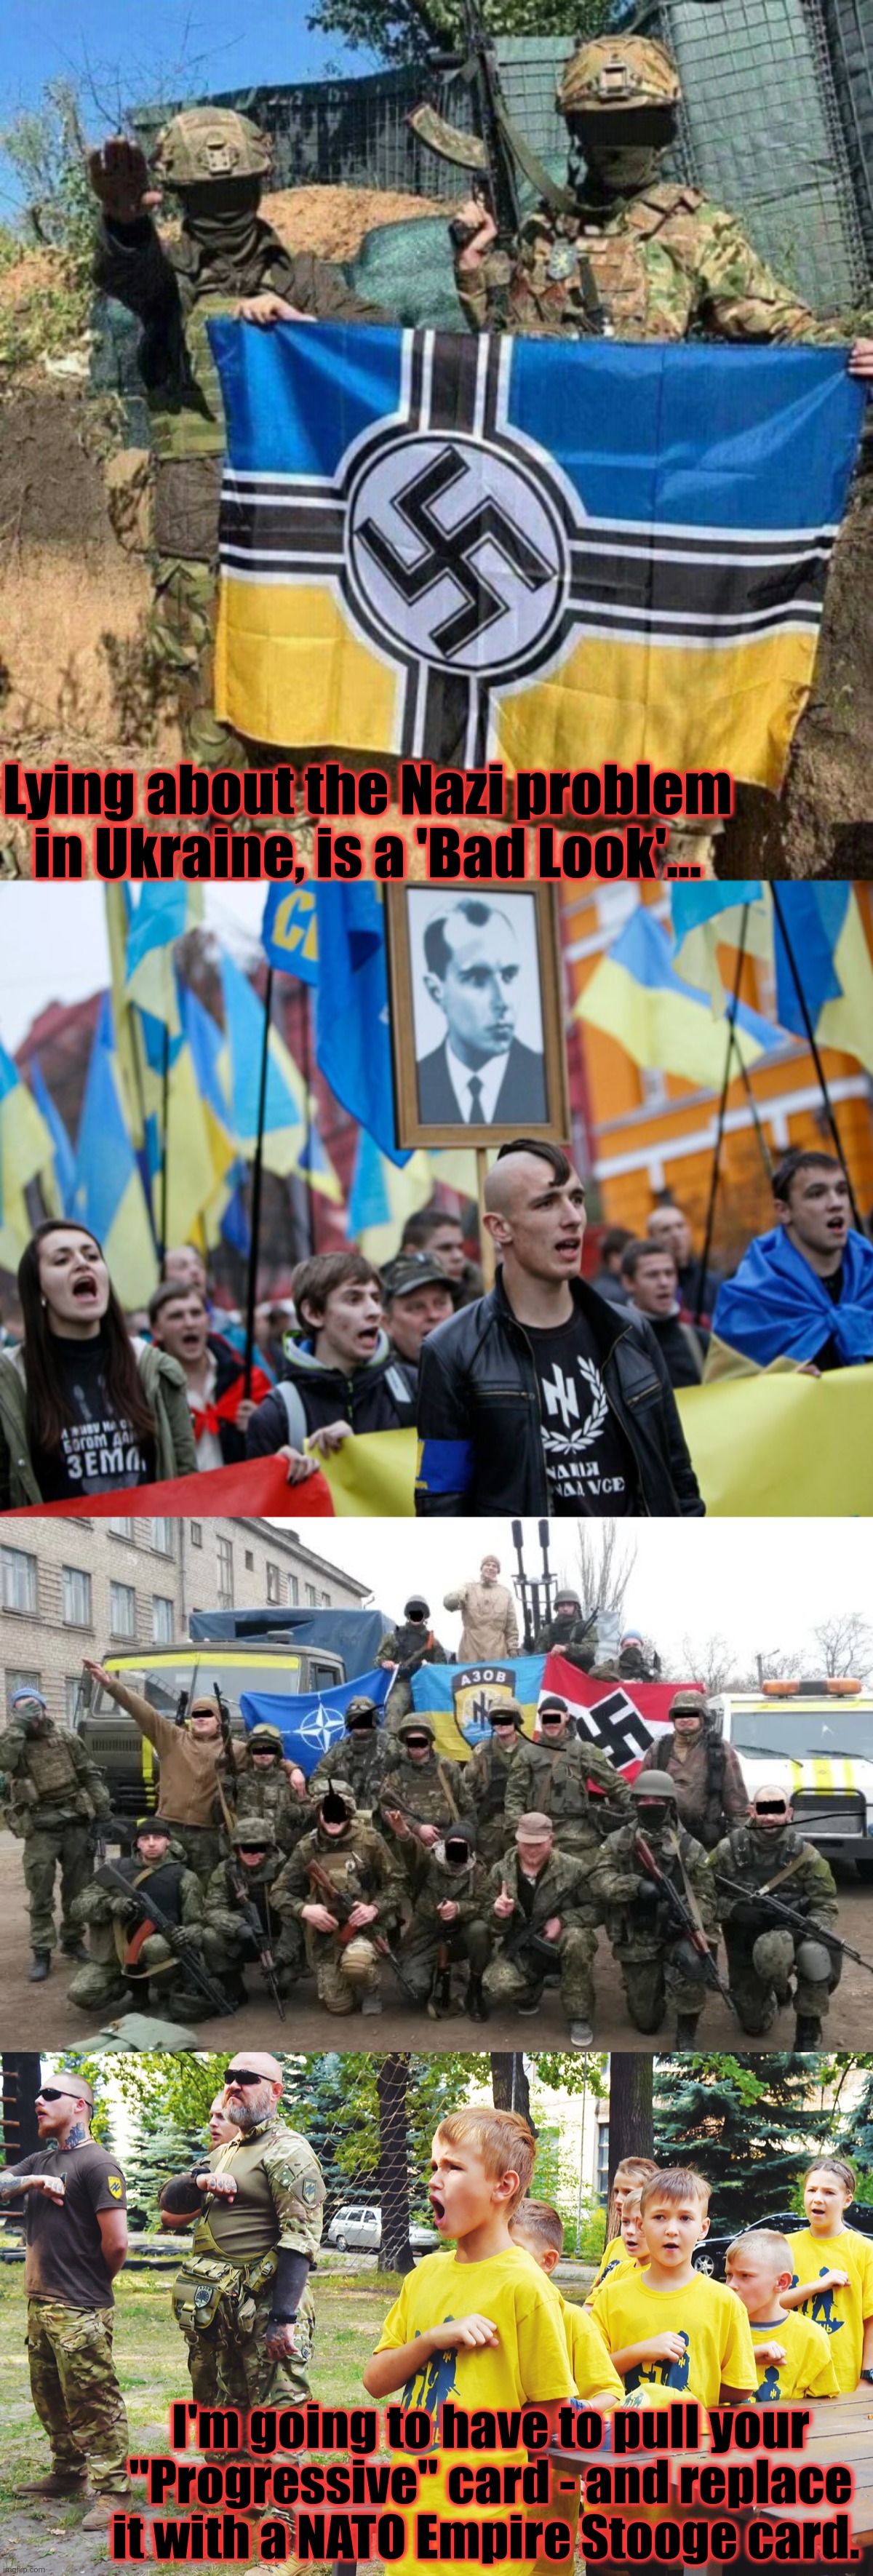 Lying about the Nazi problem in Ukraine, is a 'Bad Look'... I'm going to have to pull your "Progressive" card - and replace it with a NATO Empire Stooge card. | image tagged in azov battalion neonazi bad guys with flag | made w/ Imgflip meme maker